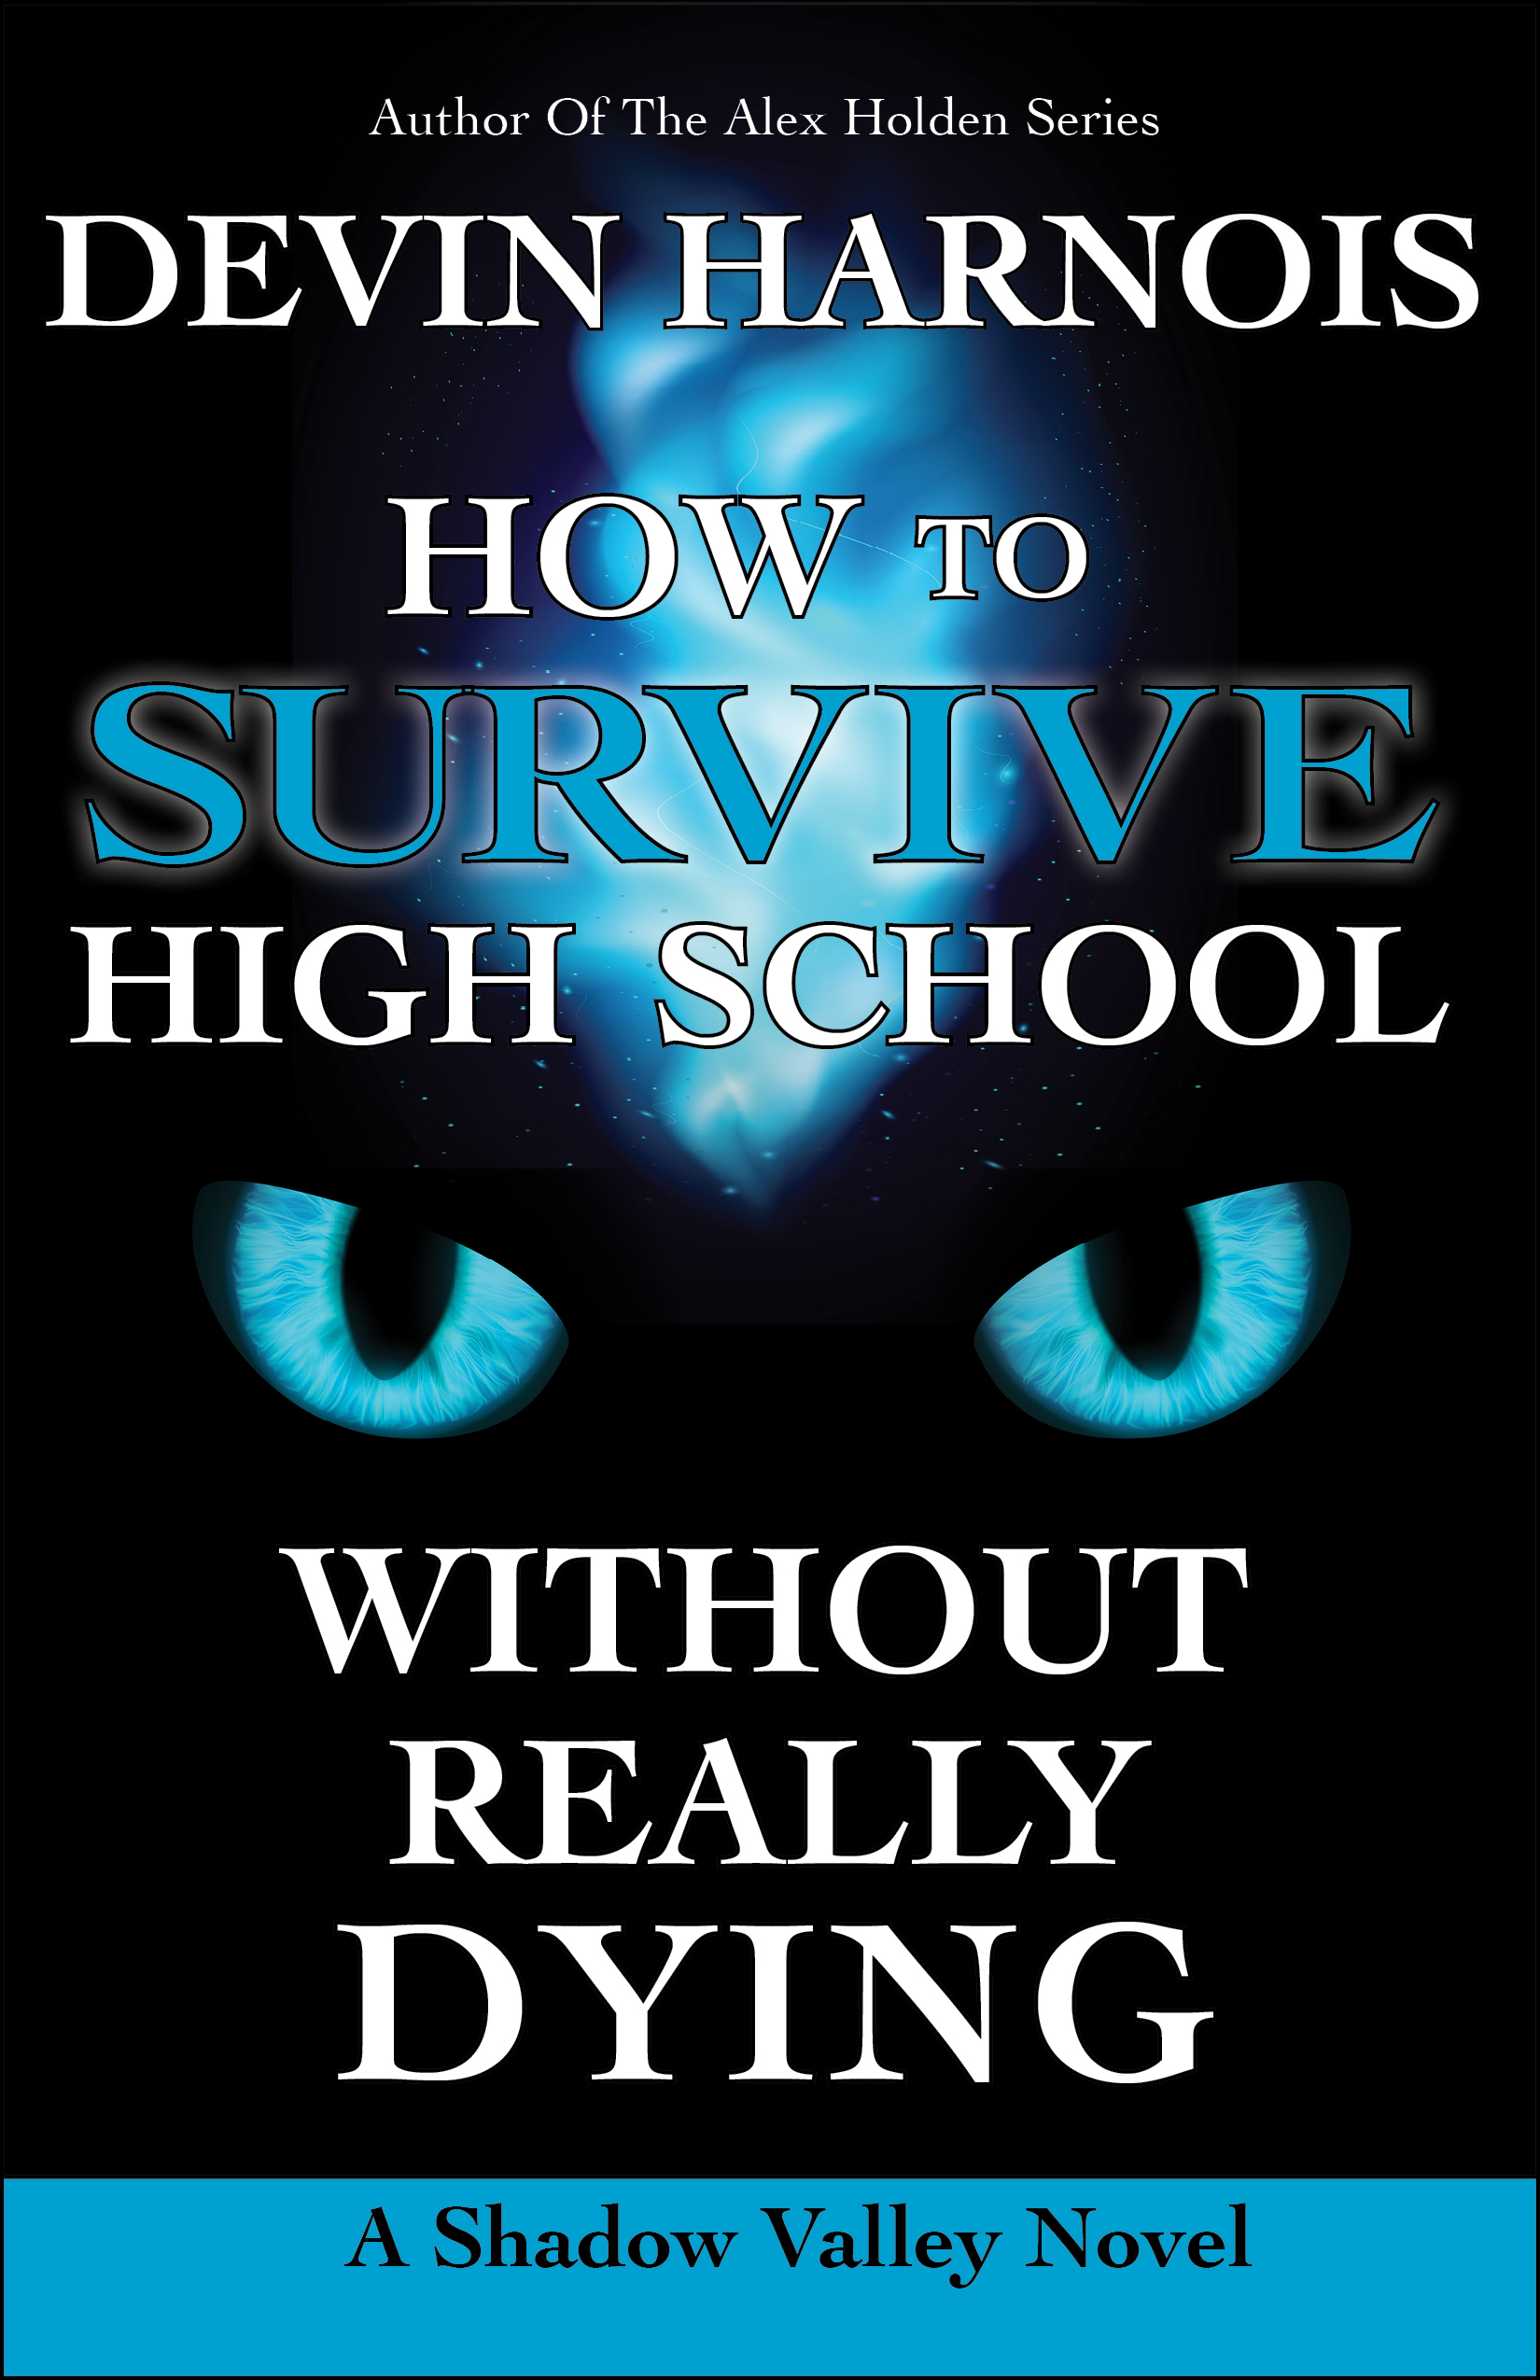 How to Survive High School Without Really Dying